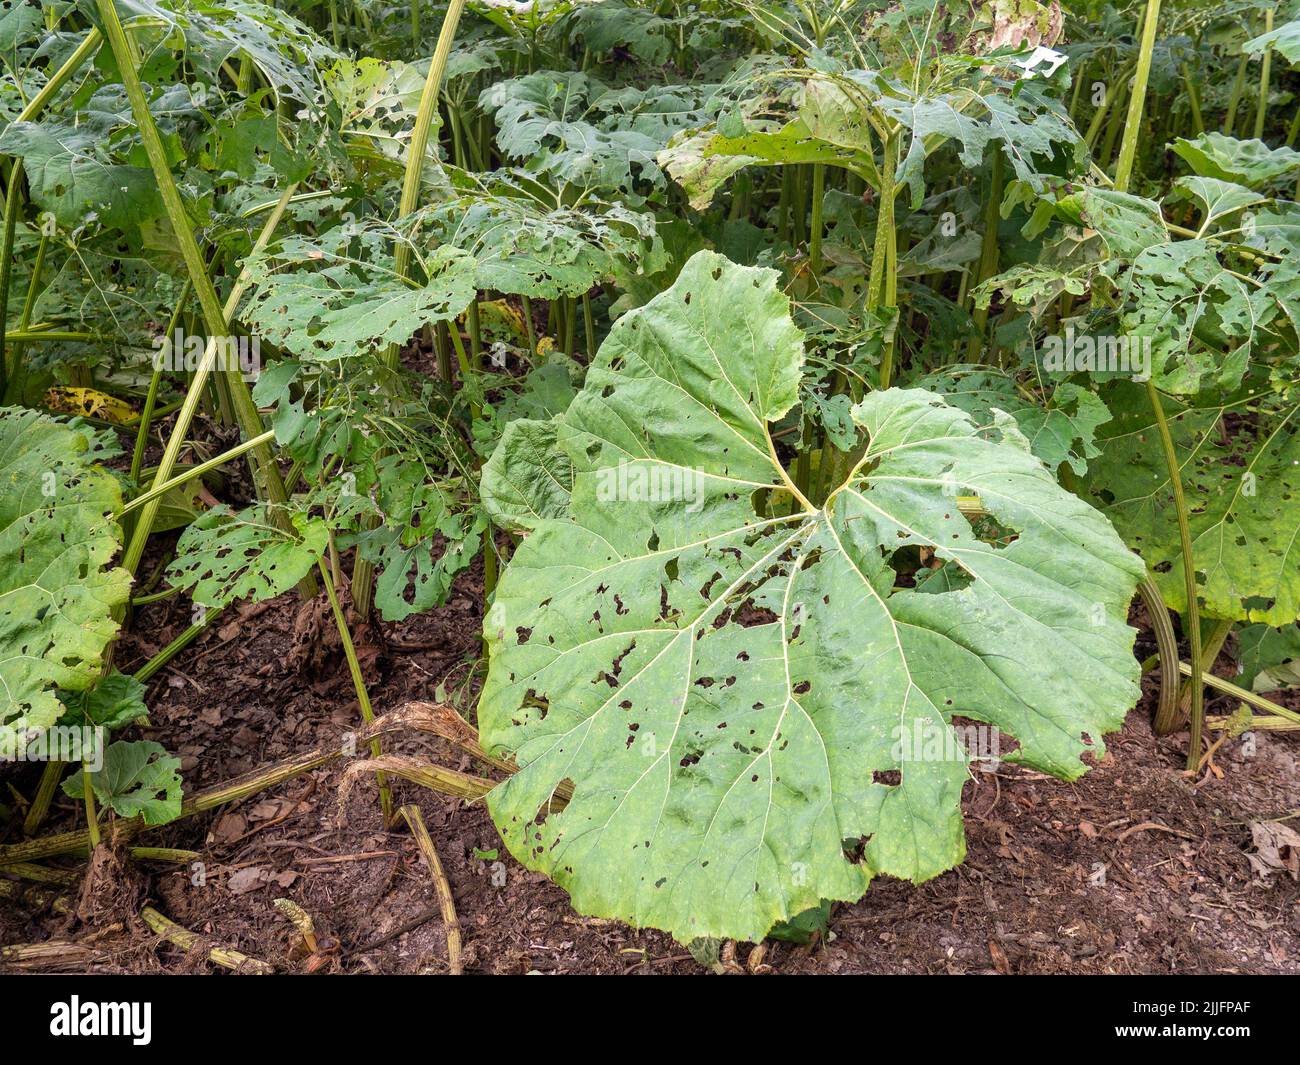 The green leaves of Poor Man's Umbrella plant (Gunnera insignis) that are eaten by mice and other pests. Stock Photo